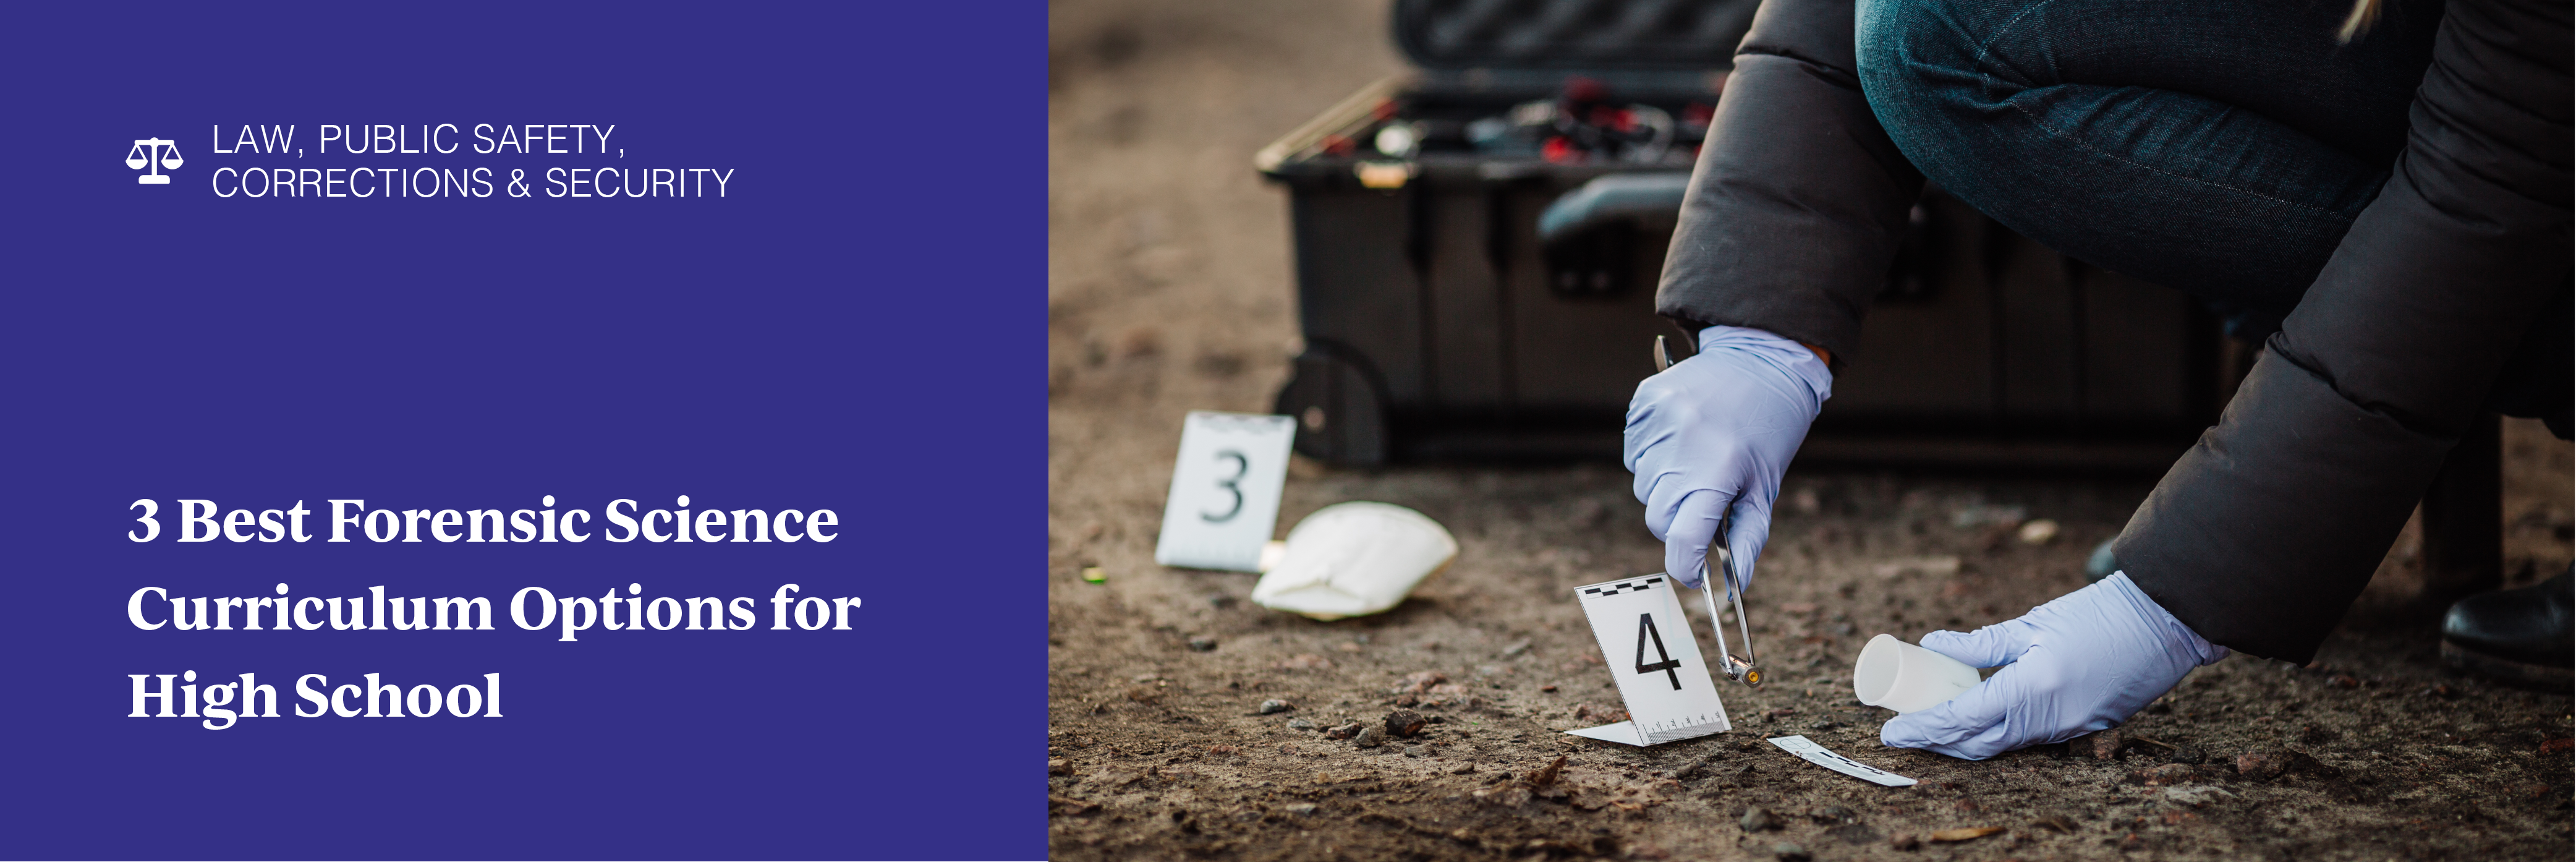 3 Best Forensic Science Curriculum Options for High School